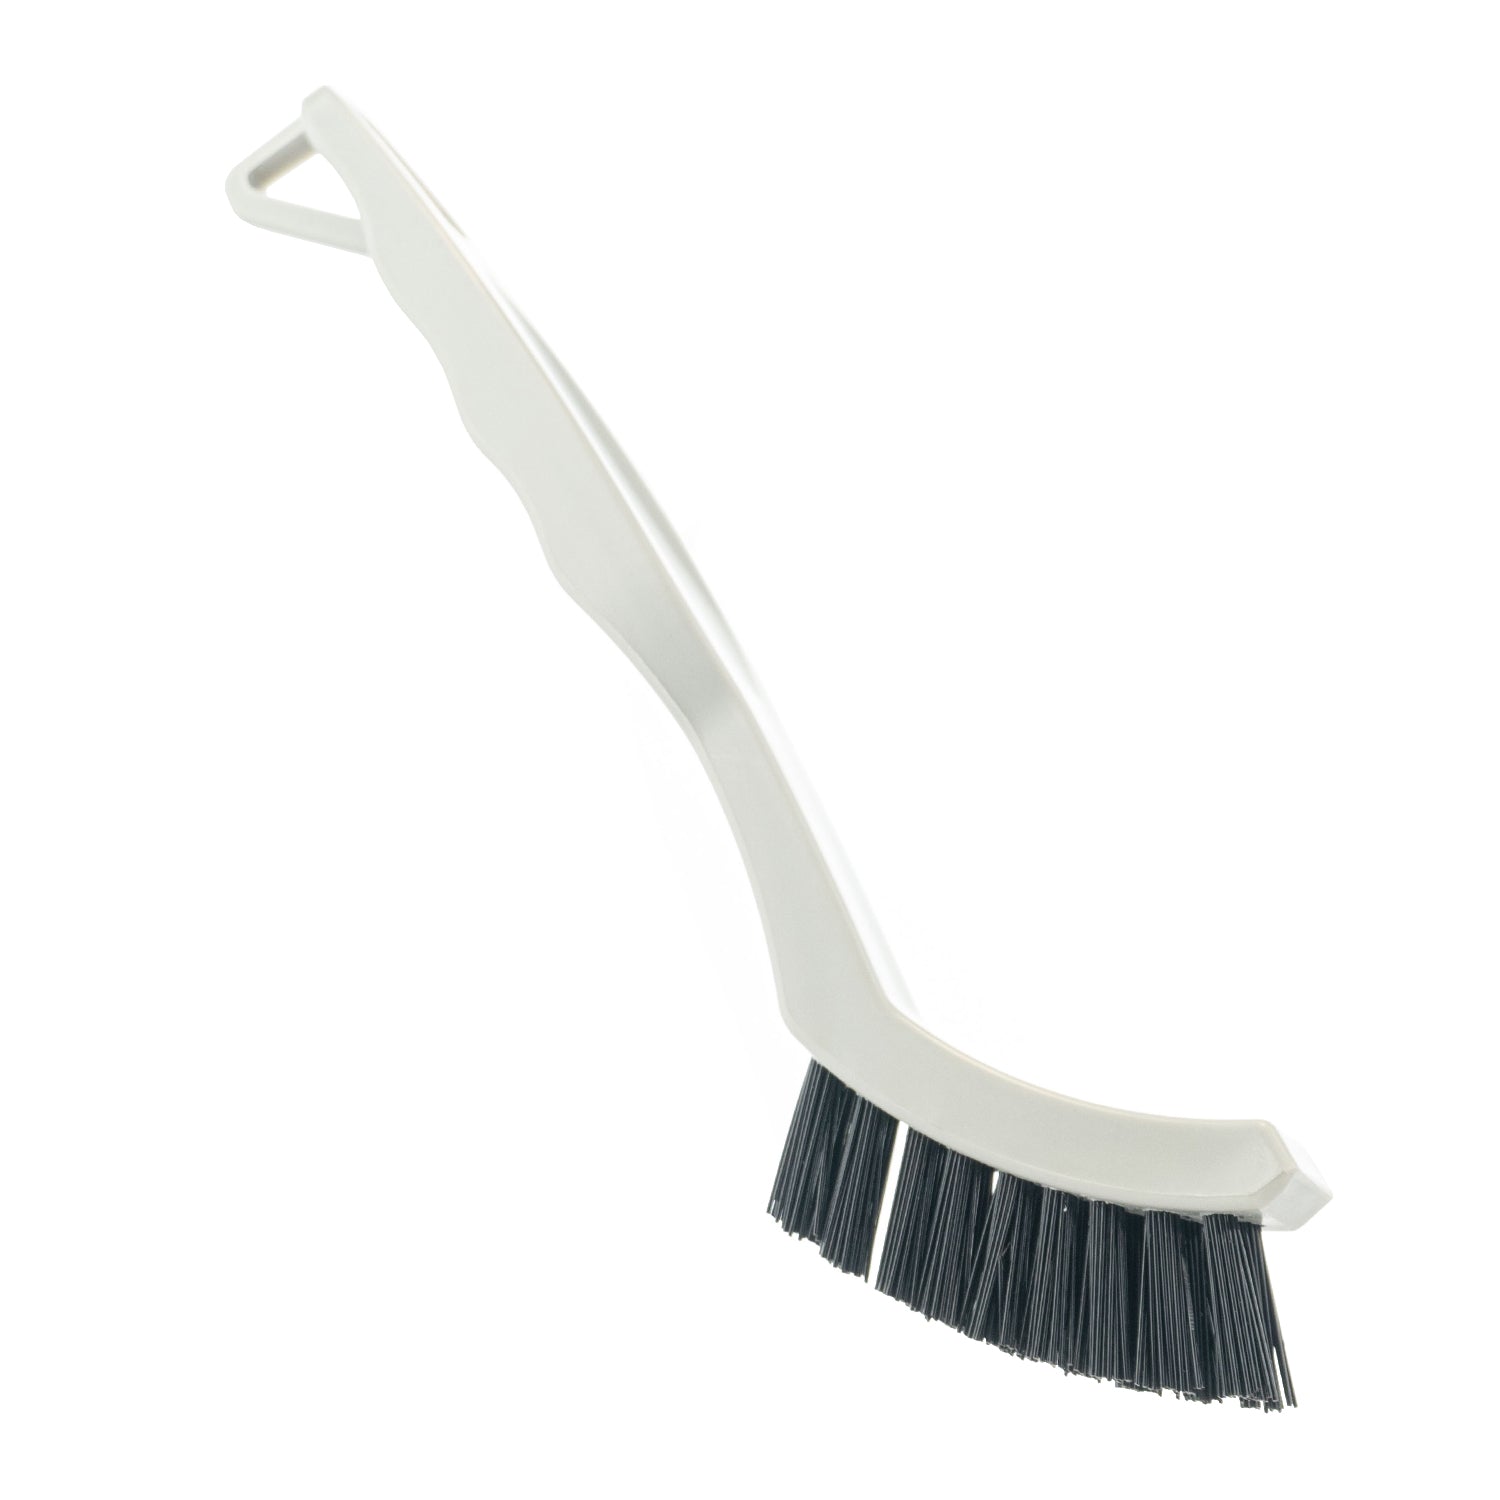 grout-and-tile-cleaning-brush